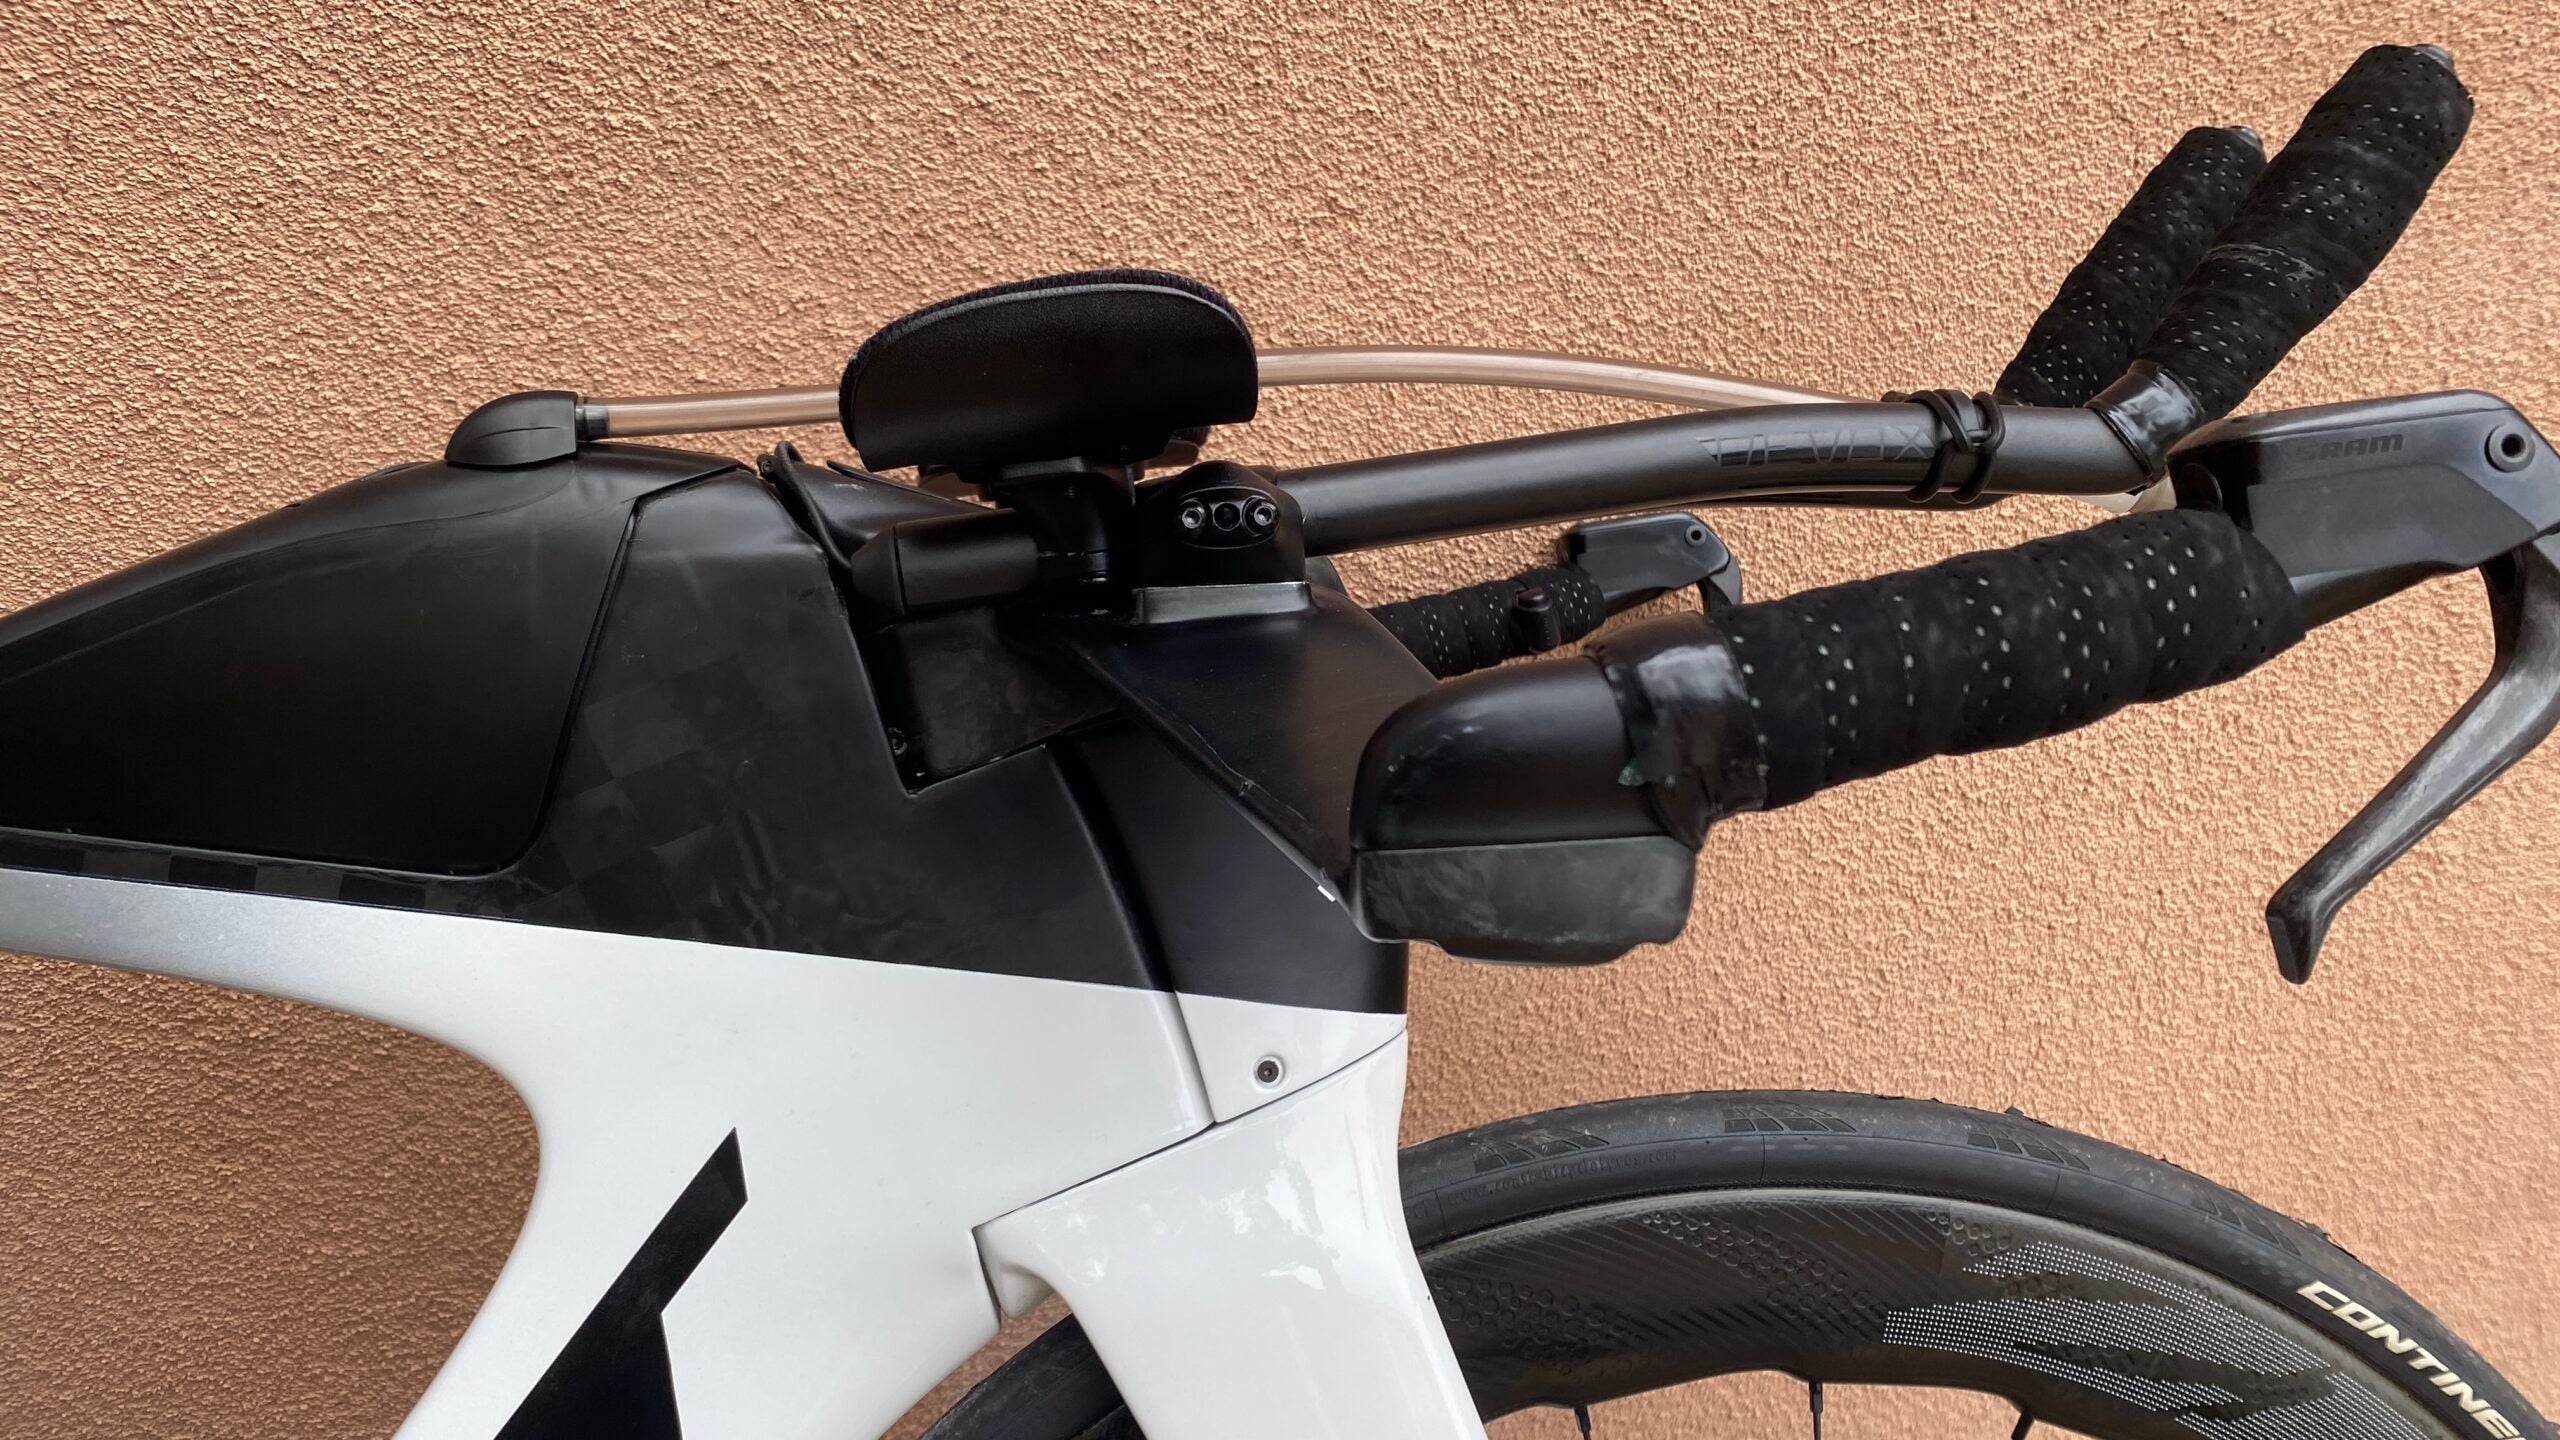 The cockpit of the Felt IA 2.0 reviewed for this article.